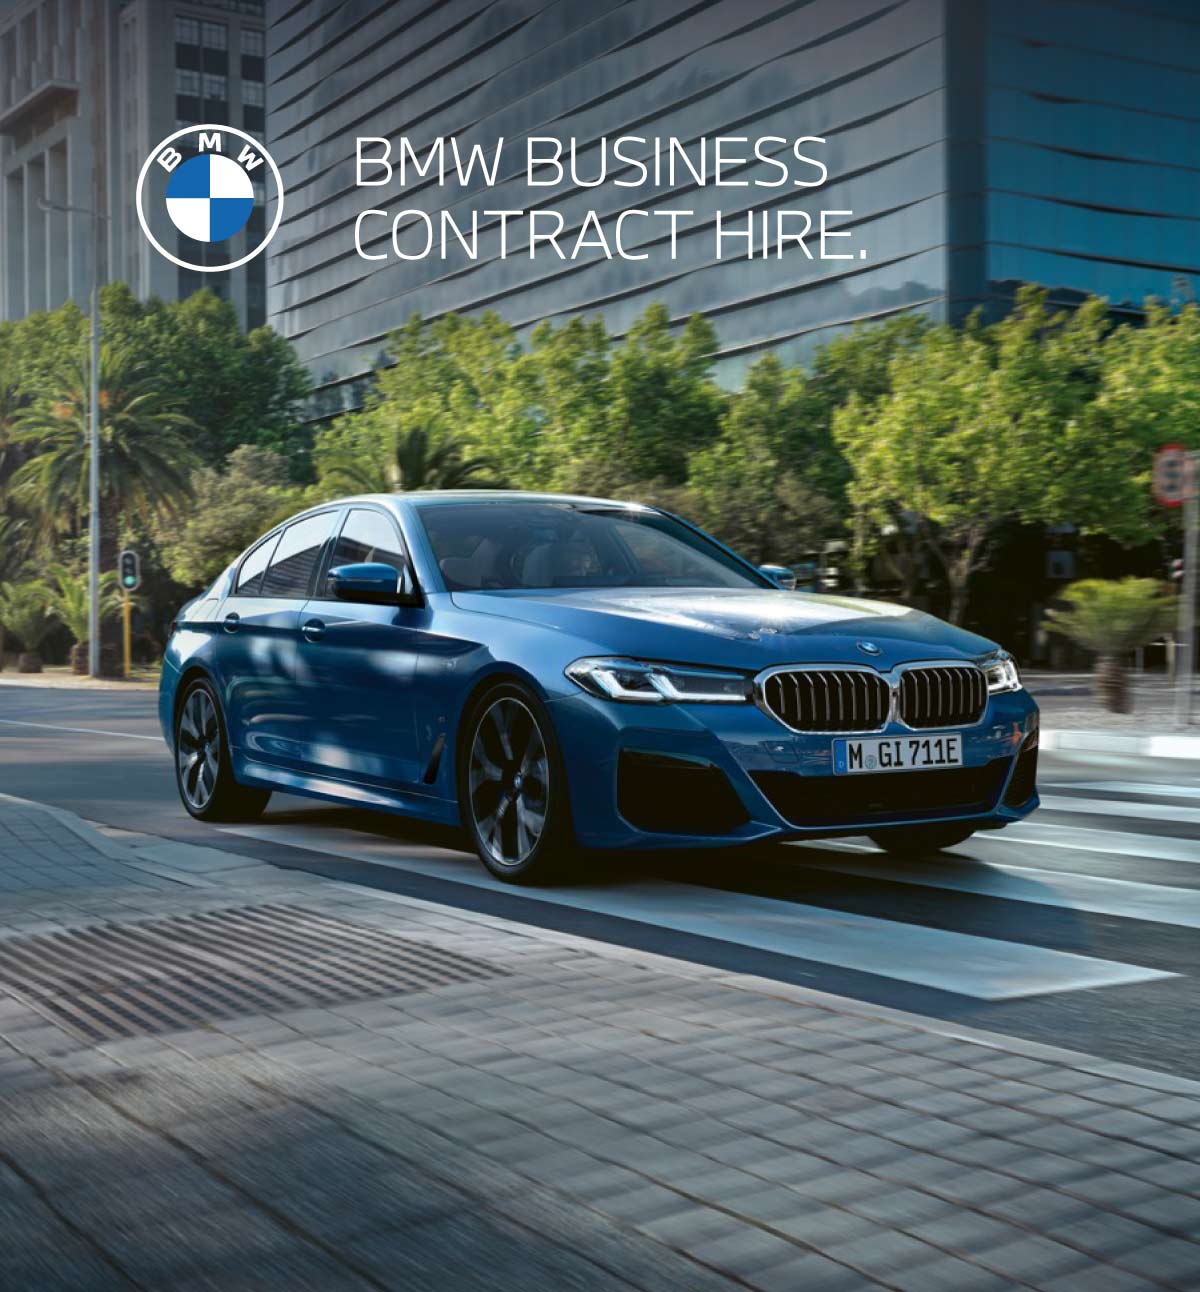 BMW Business Contract Hire BB